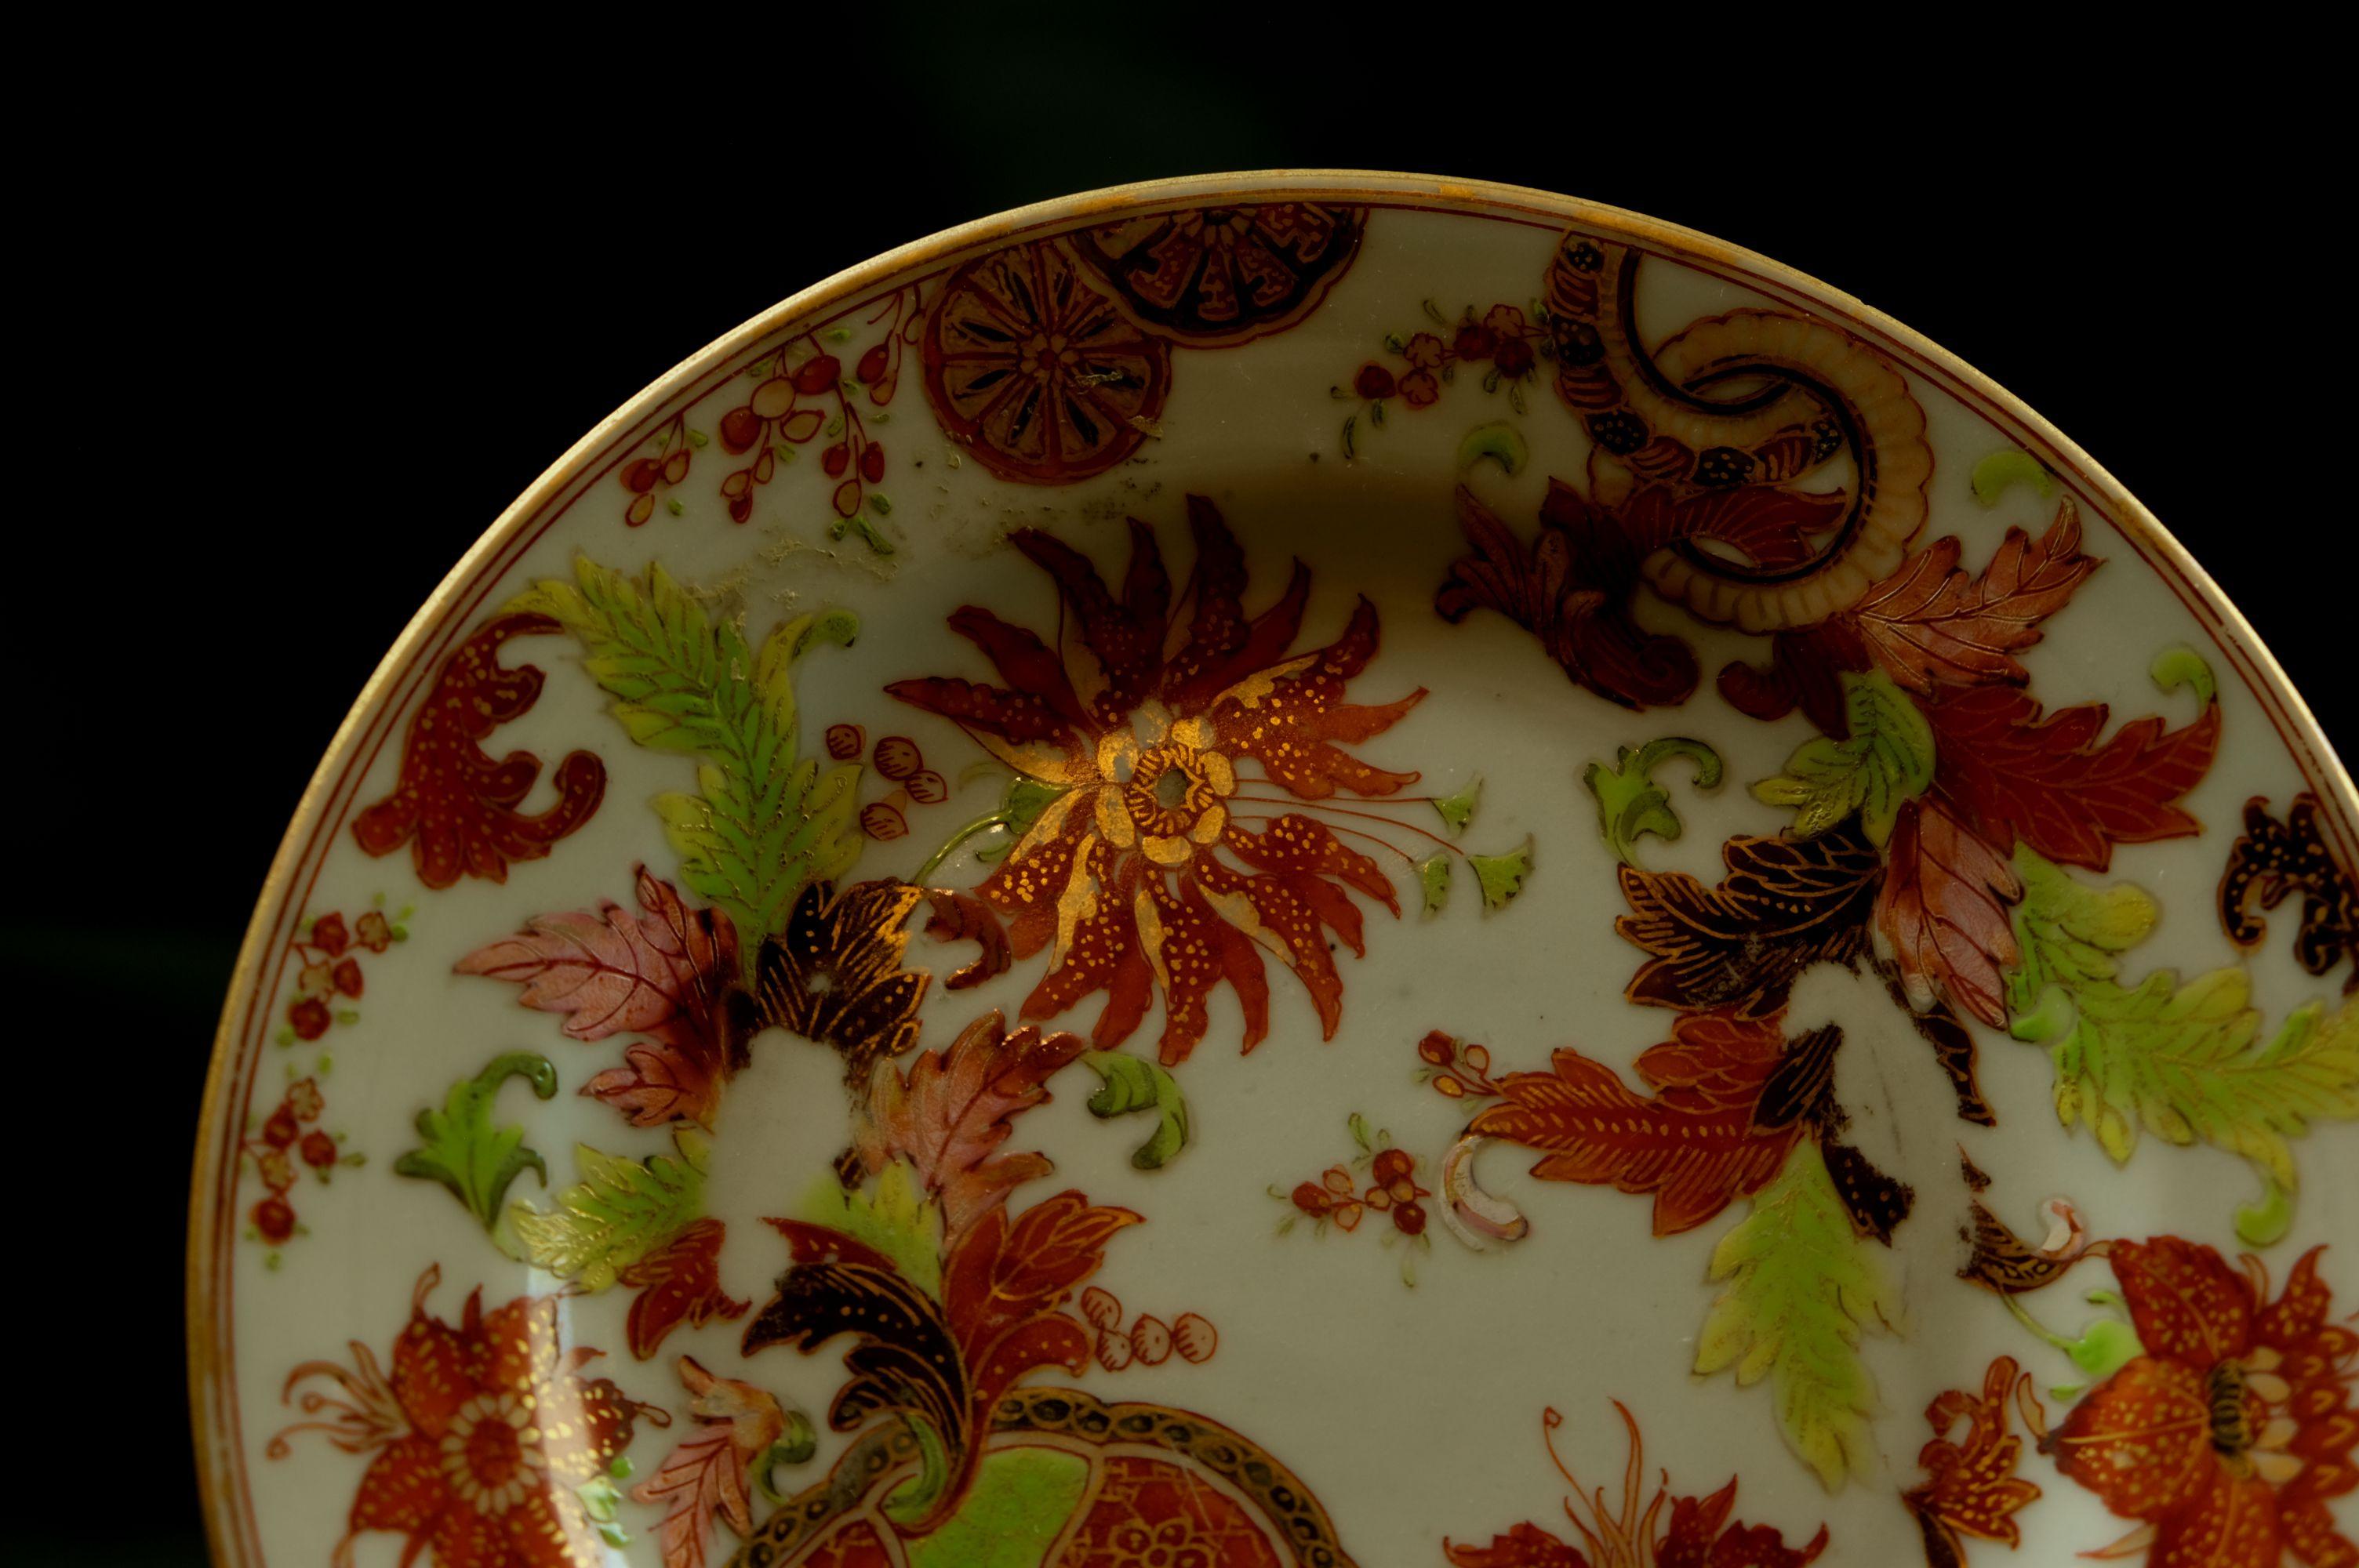 True antique of Chinese export porcelain dinner plate, meticulously hand-painted in the exuberant Pseudo-Tobacco leaf pattern with rich foliate and floral designs.